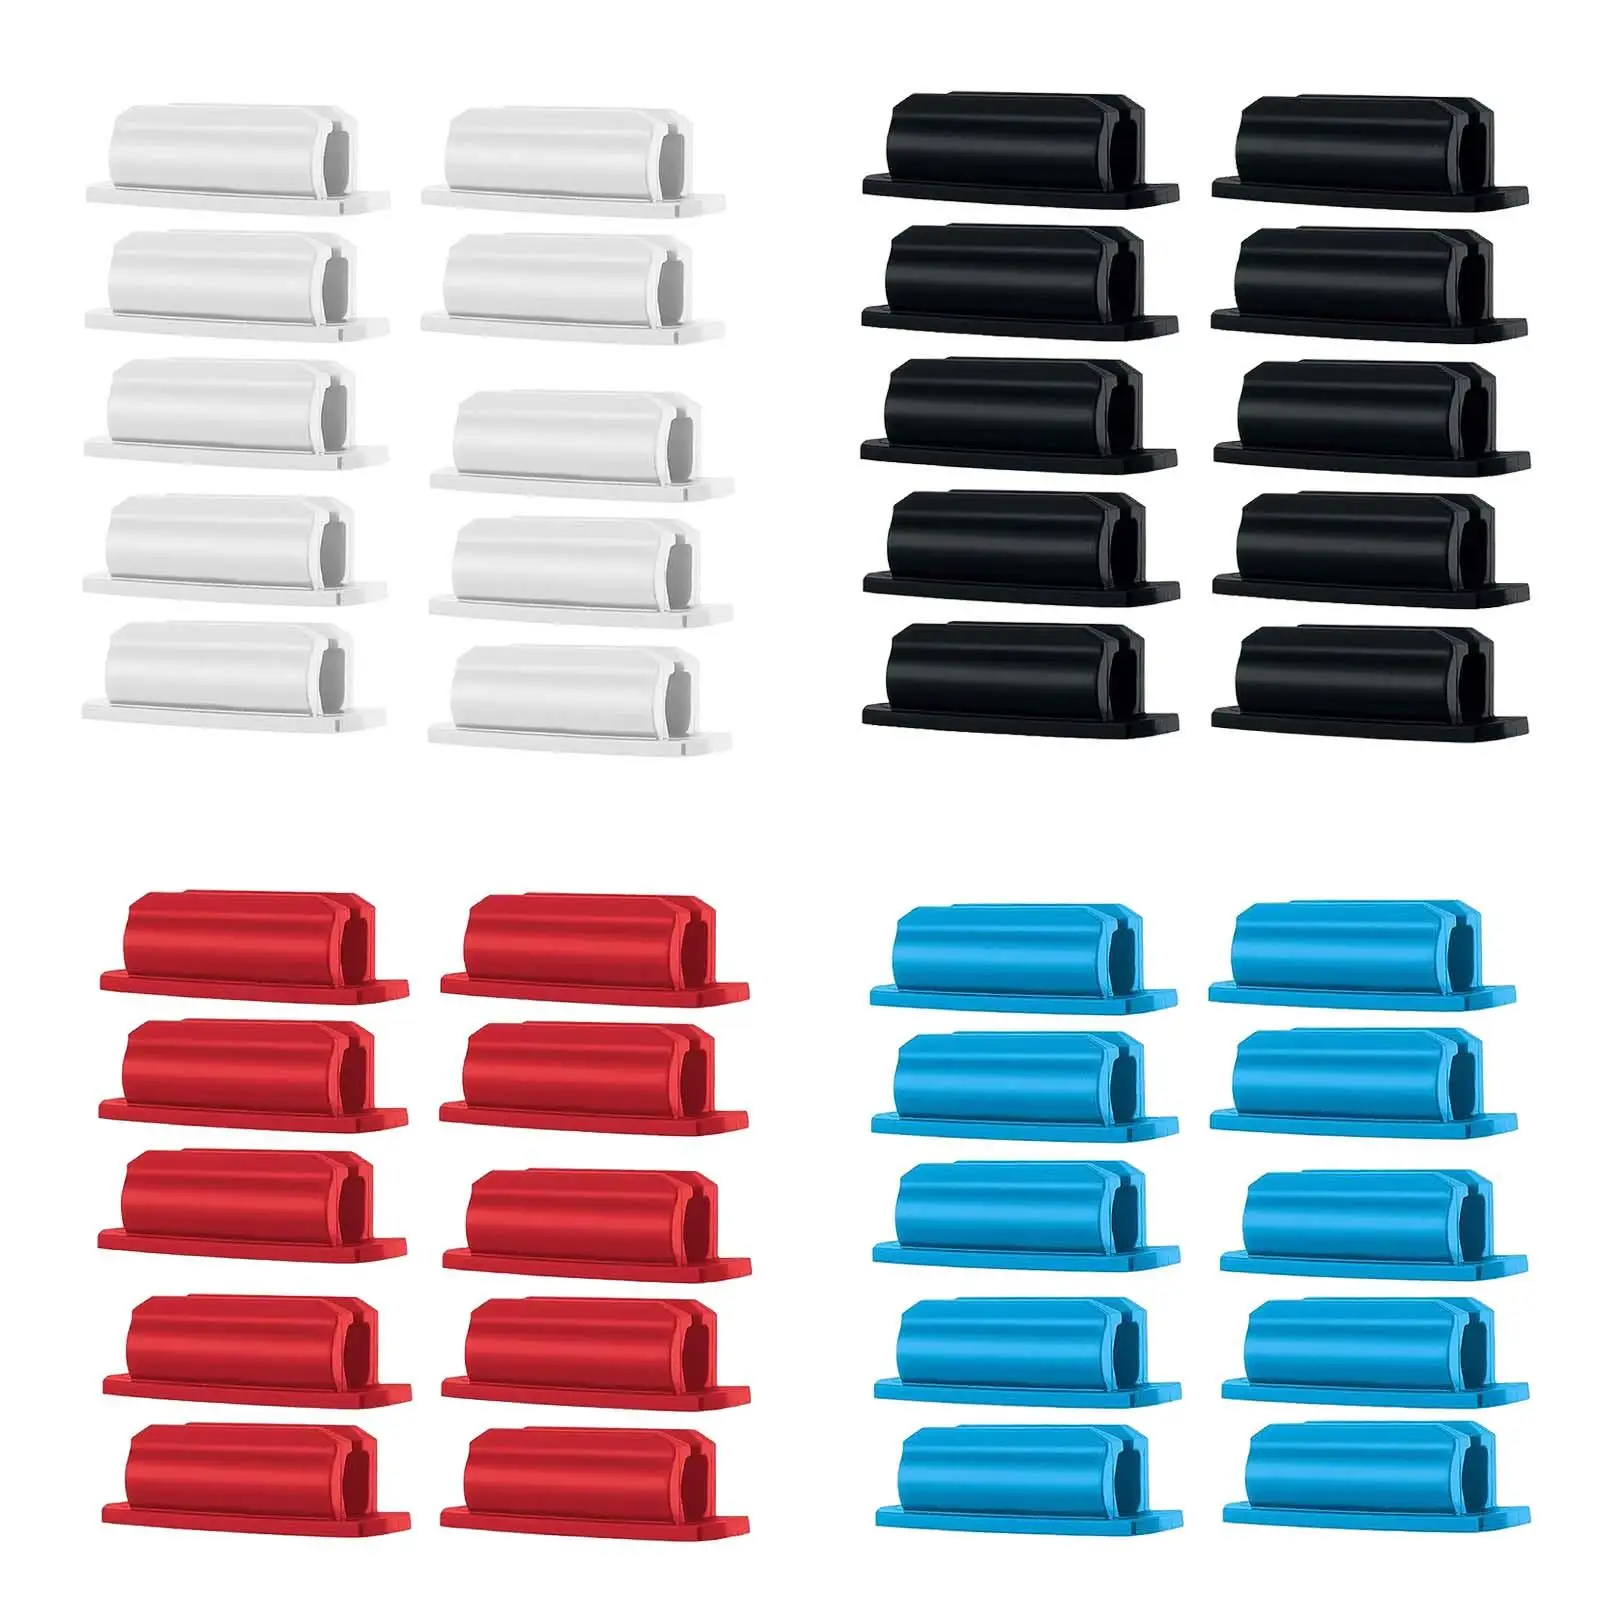 10x Sticky Silicone Pen Holder Pencil Clip for Clipboard Office for Car Computer Clipboards Bulletin Board Desktop Accessories